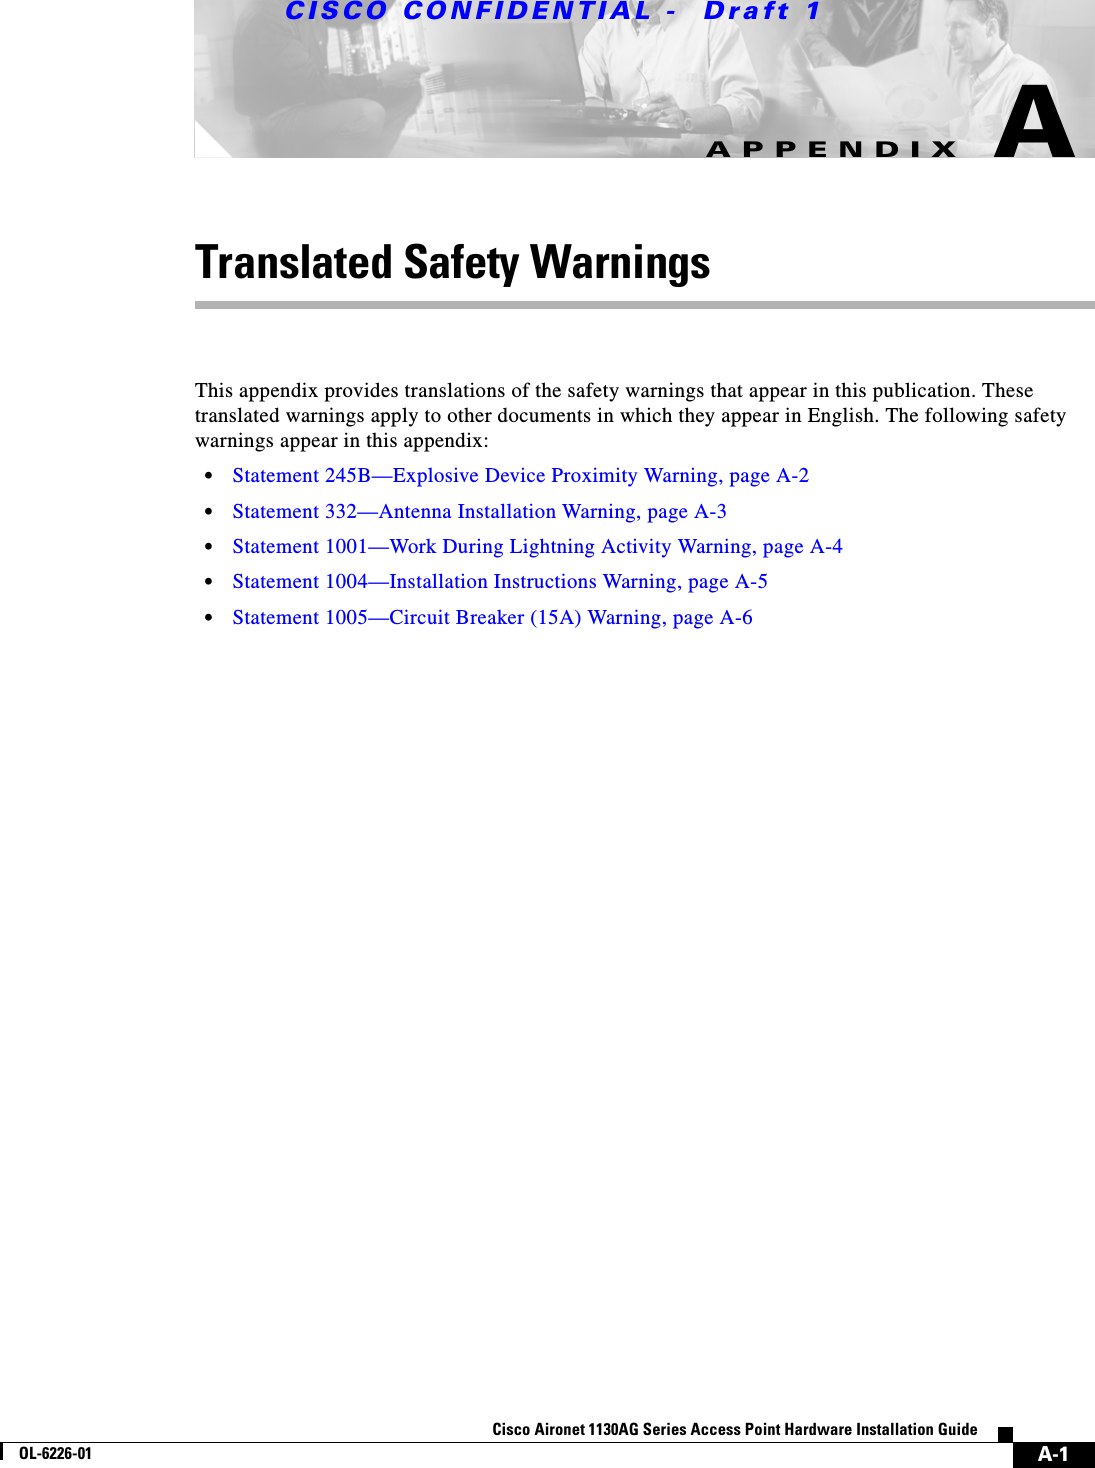  CISCO CONFIDENTIAL -  Draft 1A-1Cisco Aironet 1130AG Series Access Point Hardware Installation GuideOL-6226-01APPENDIXATranslated Safety WarningsThis appendix provides translations of the safety warnings that appear in this publication. These translated warnings apply to other documents in which they appear in English. The following safety warnings appear in this appendix:•Statement 245B—Explosive Device Proximity Warning, page A-2•Statement 332—Antenna Installation Warning, page A-3•Statement 1001—Work During Lightning Activity Warning, page A-4•Statement 1004—Installation Instructions Warning, page A-5•Statement 1005—Circuit Breaker (15A) Warning, page A-6